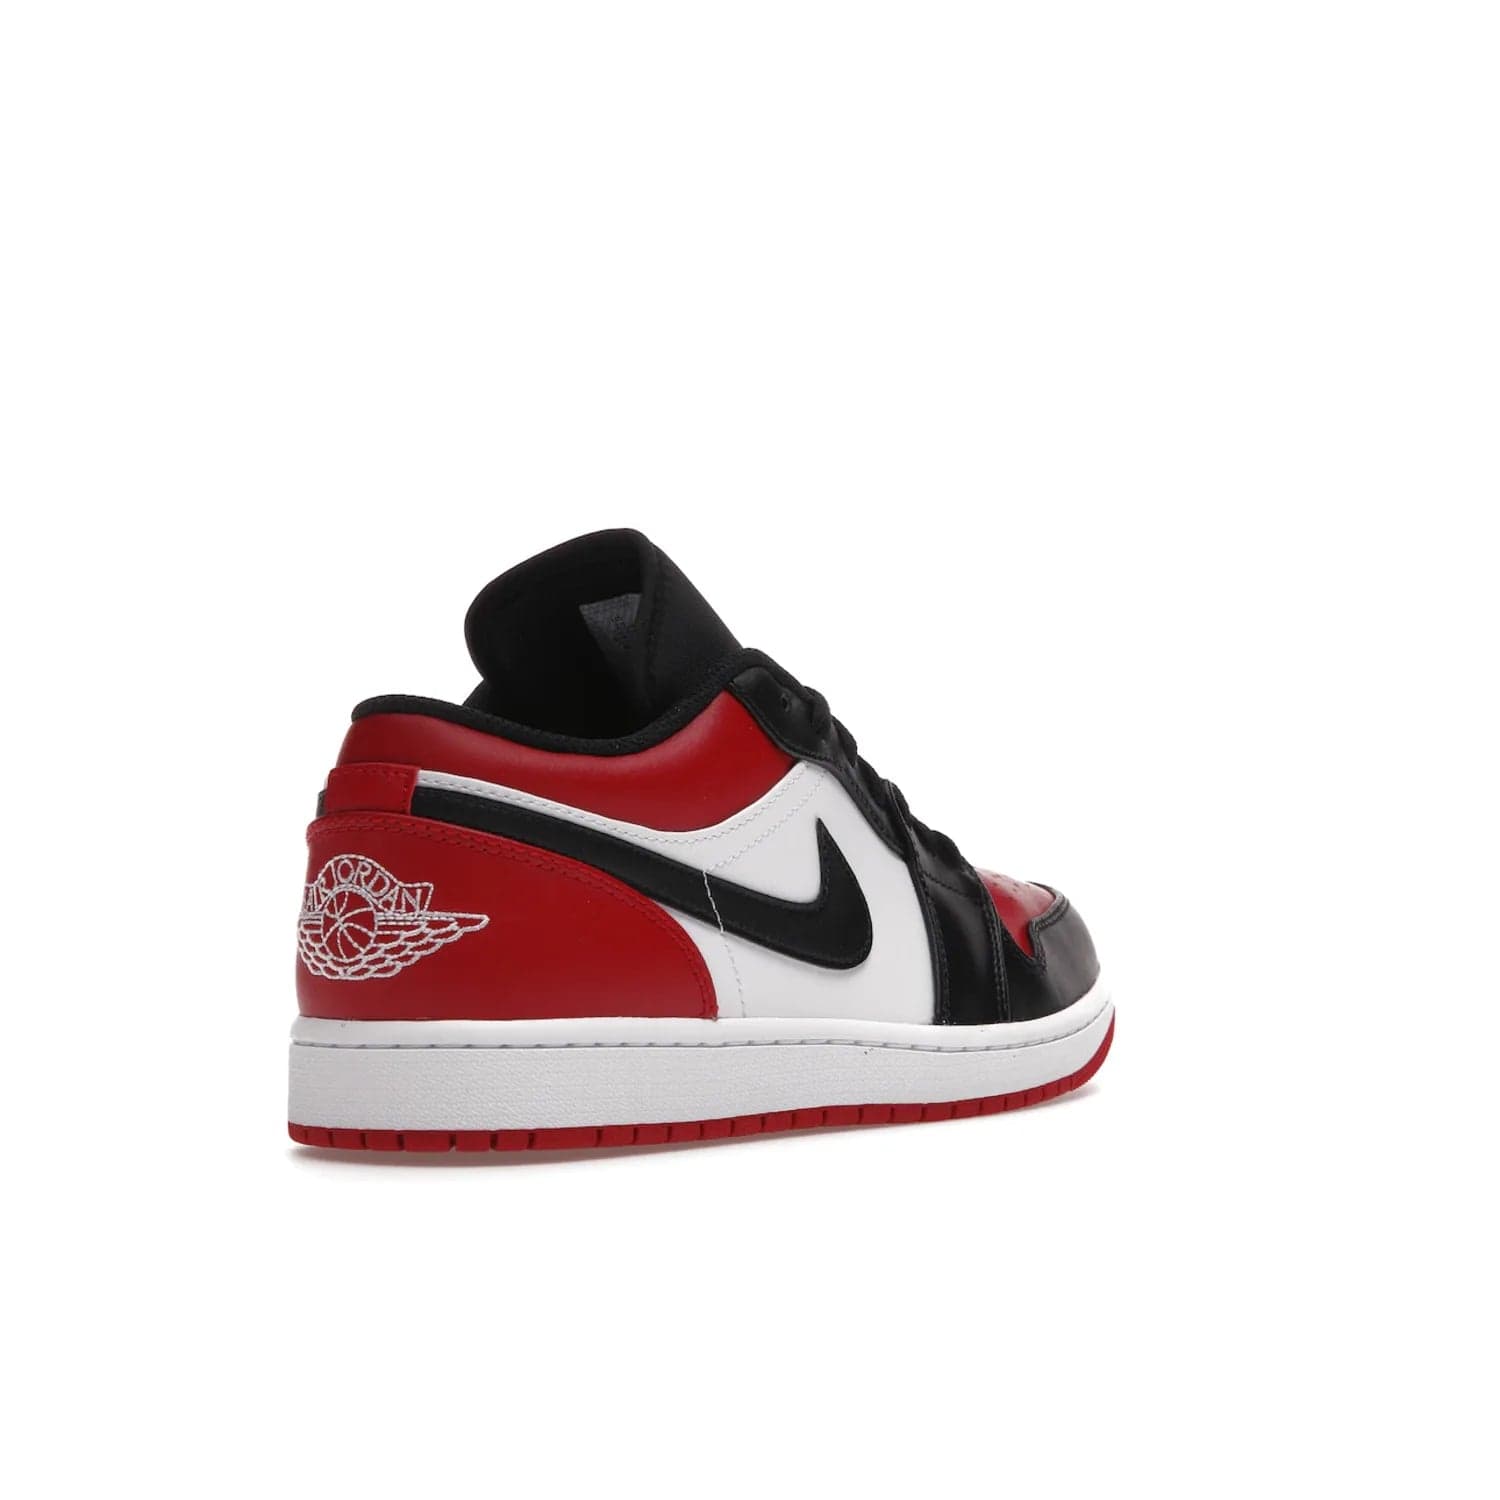 Jordan 1 Low Bred Toe - Image 32 - Only at www.BallersClubKickz.com - Step into the iconic Jordan 1 Retro. Mixing and matching of leather in red, black, and white makes for a unique colorway. Finished off with a Wing logo embroidery & Jumpman label. Comfortable and stylish at an affordable $100, the Jordan 1 Low Bred Toe is perfect for any true sneaker fan.